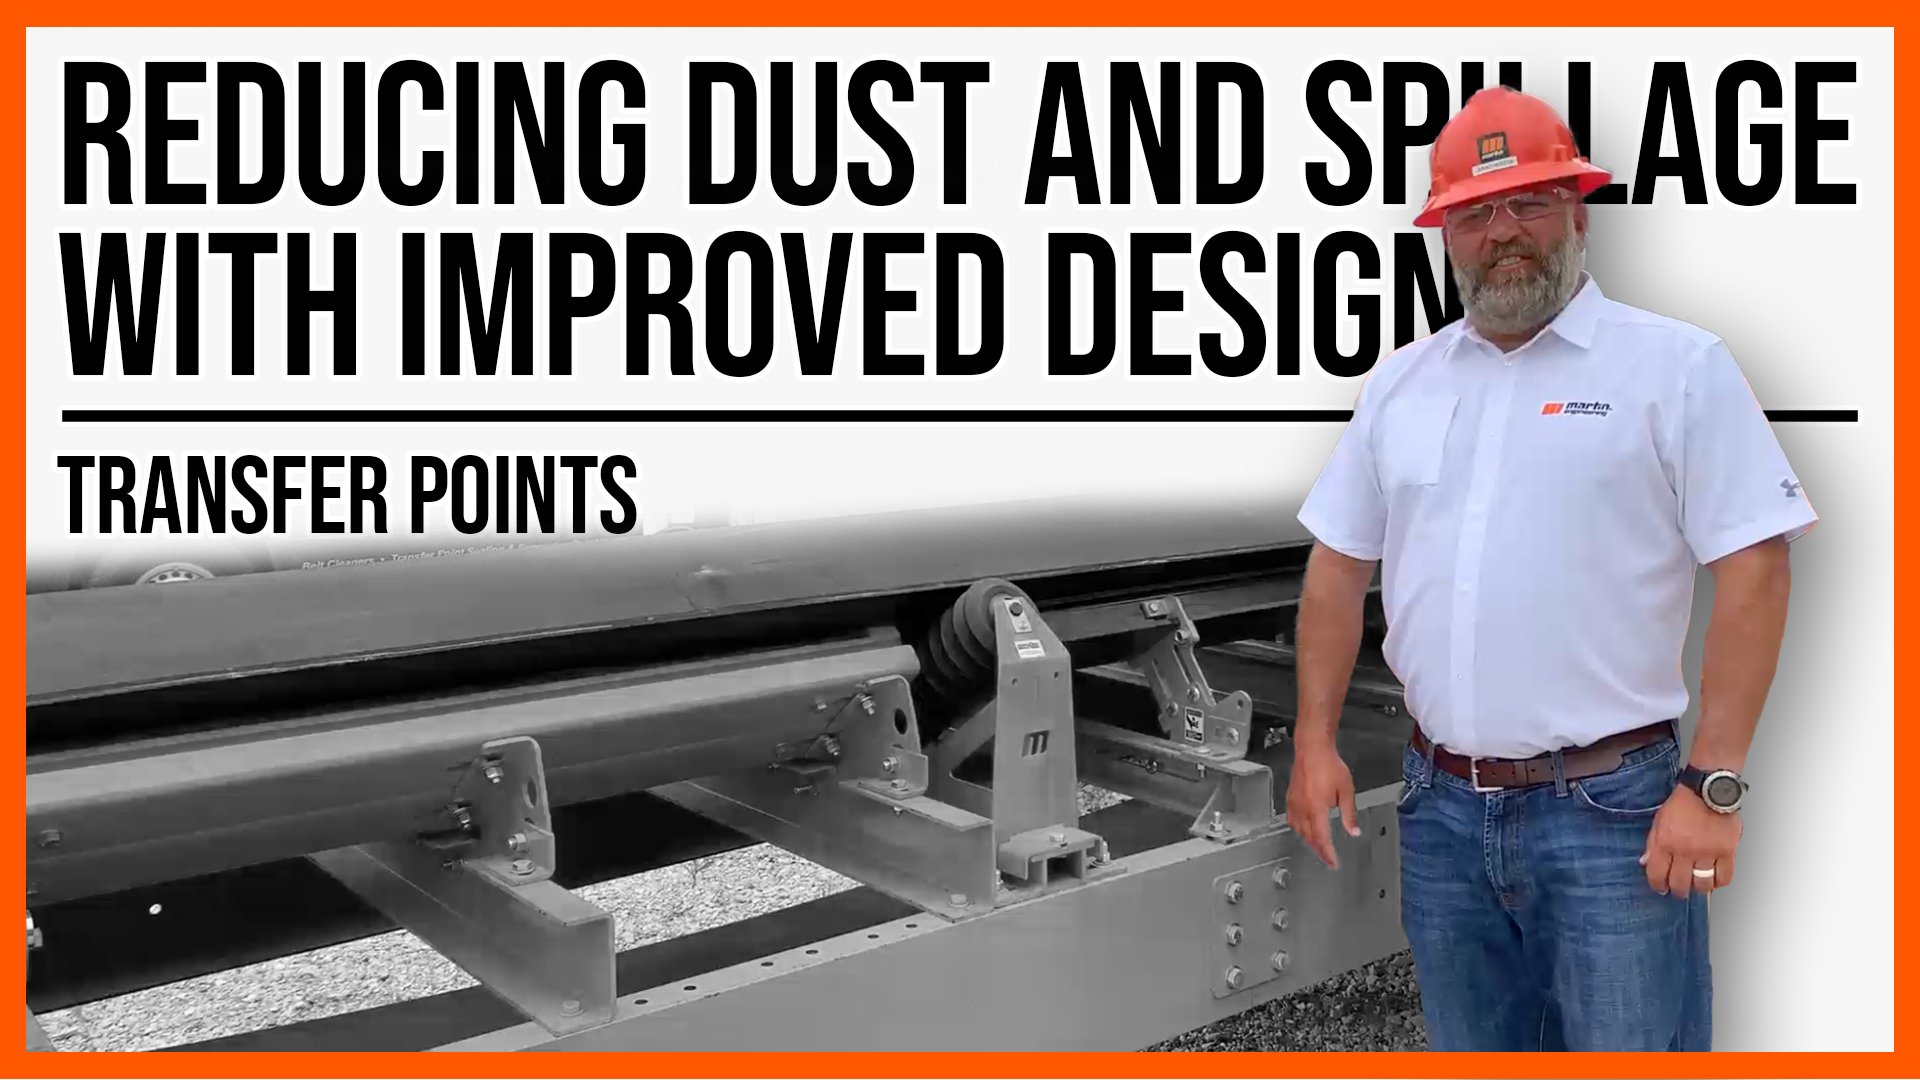 Reducing Dust and Spillage Transfer Points, Thumbnail, Hard Hat, Safety Glasses, Conveyor